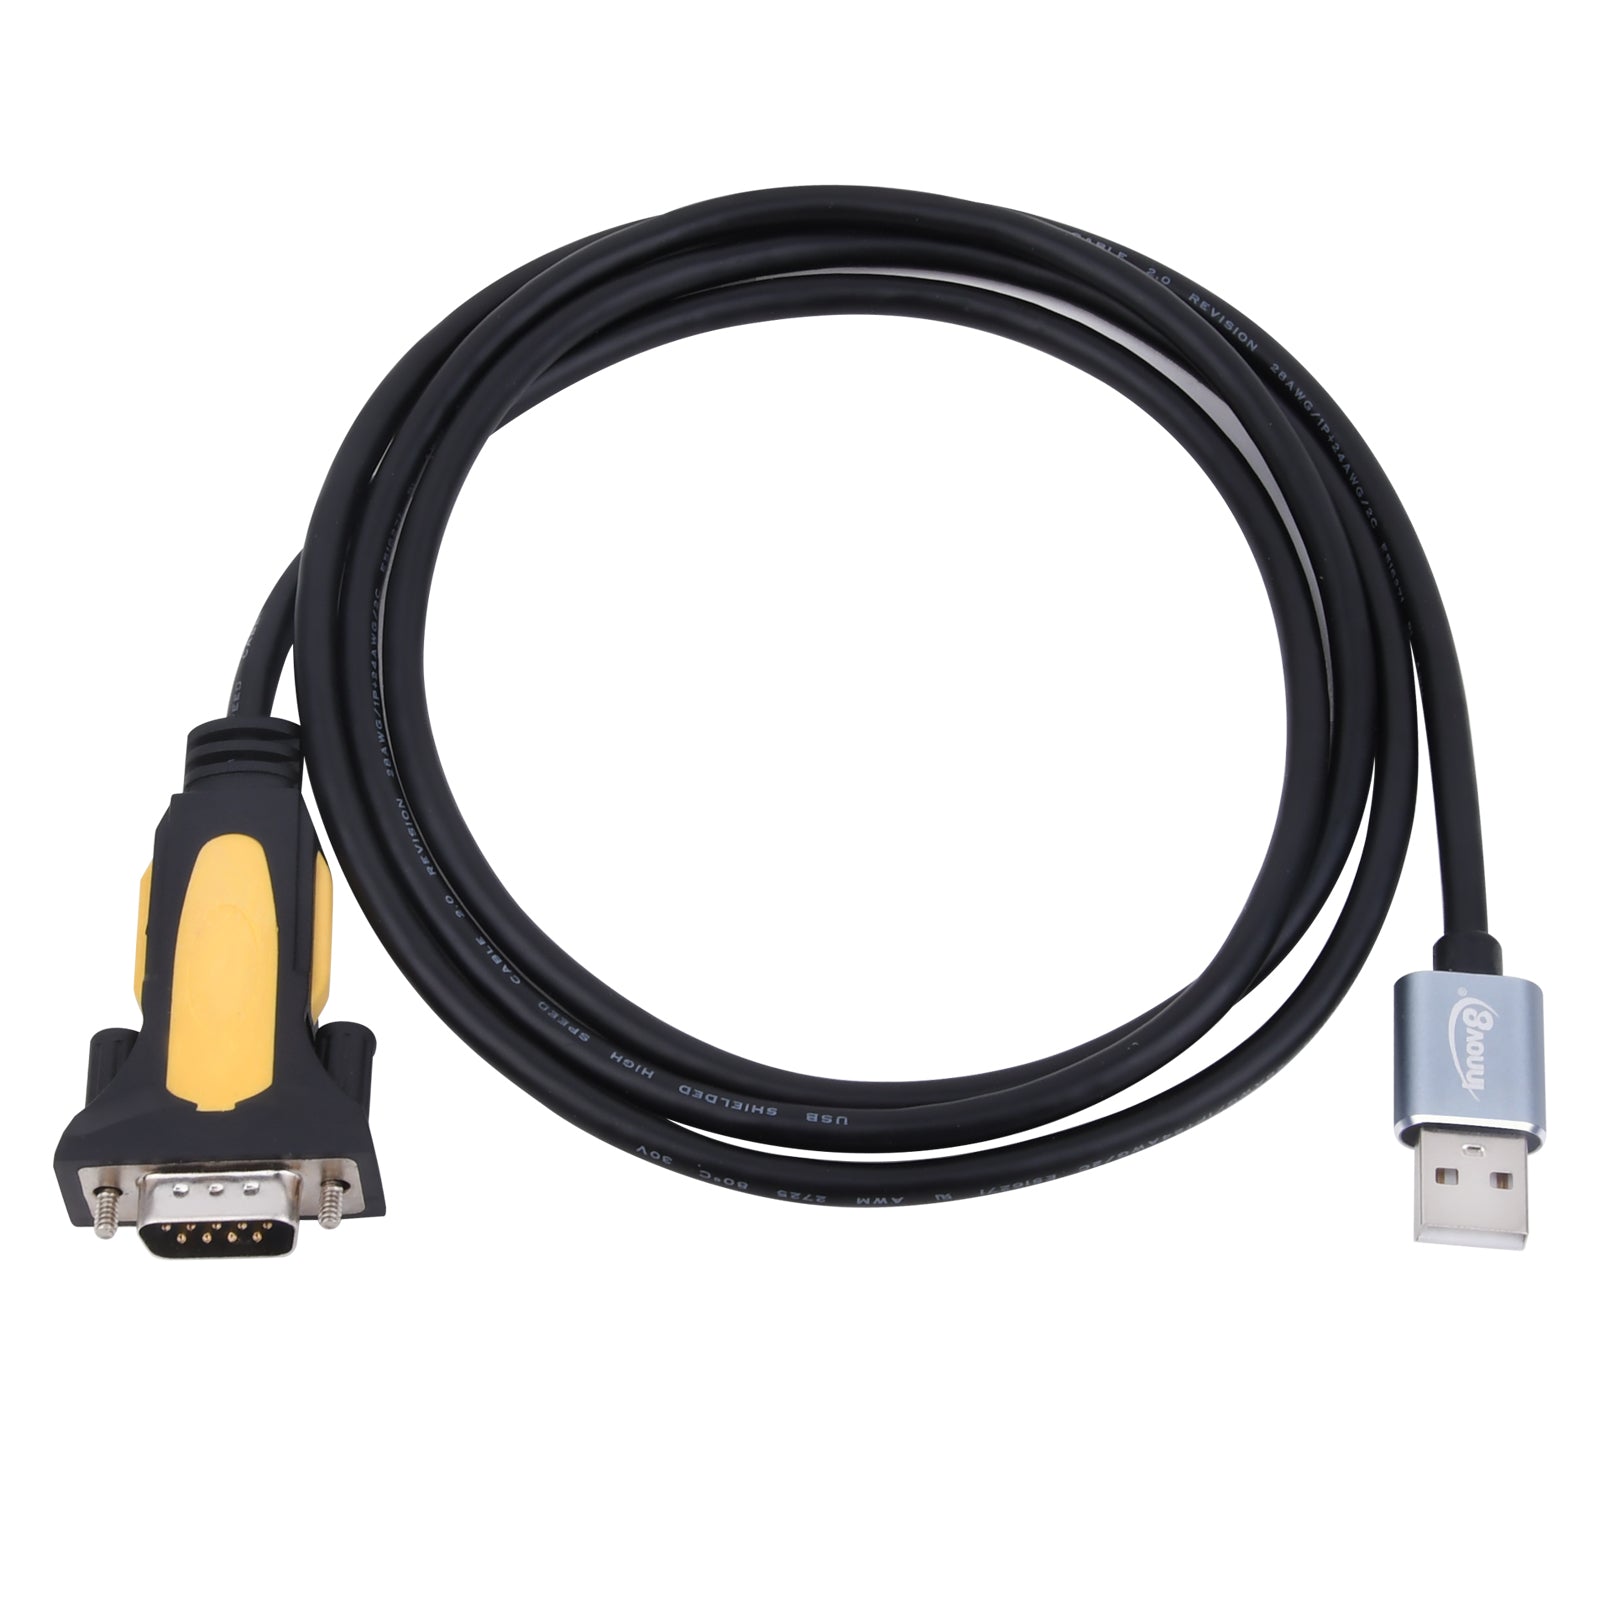 USB 2.0 to RS232 DB9 Serial Cable For Routers, GPS, Barcode Scanners, POS 1.5m